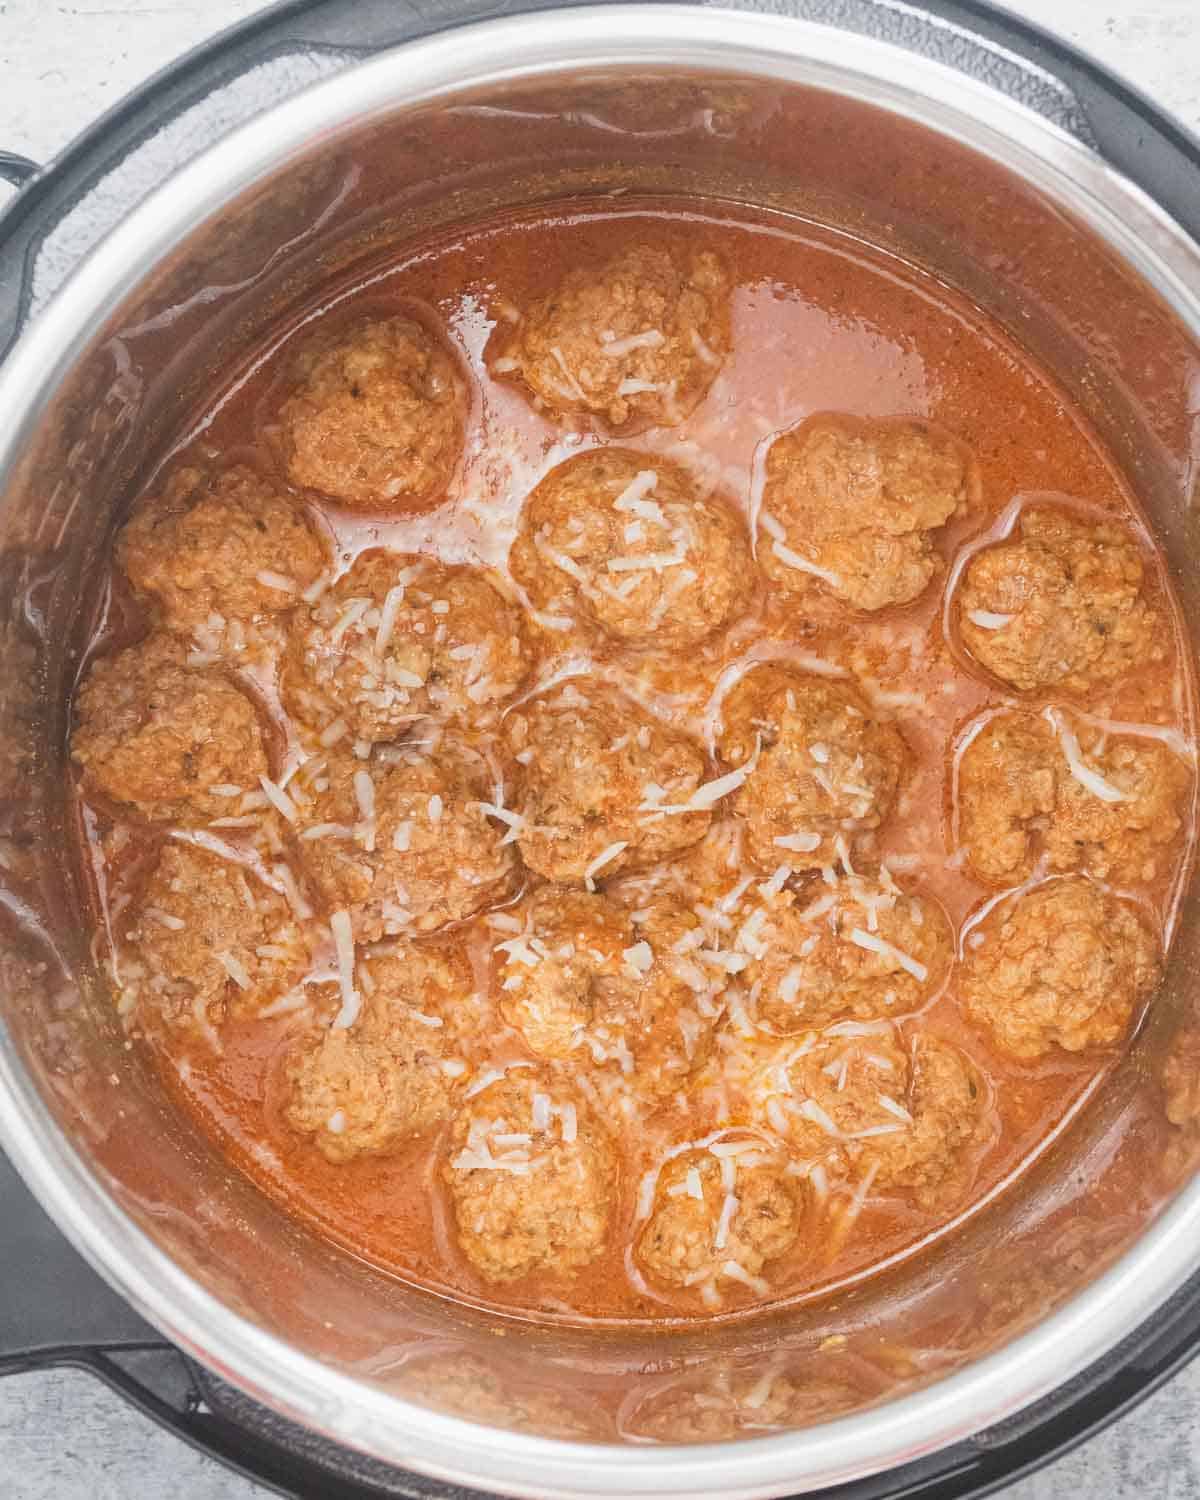 Cooked meatballs in sauce inside an Instant Pot.